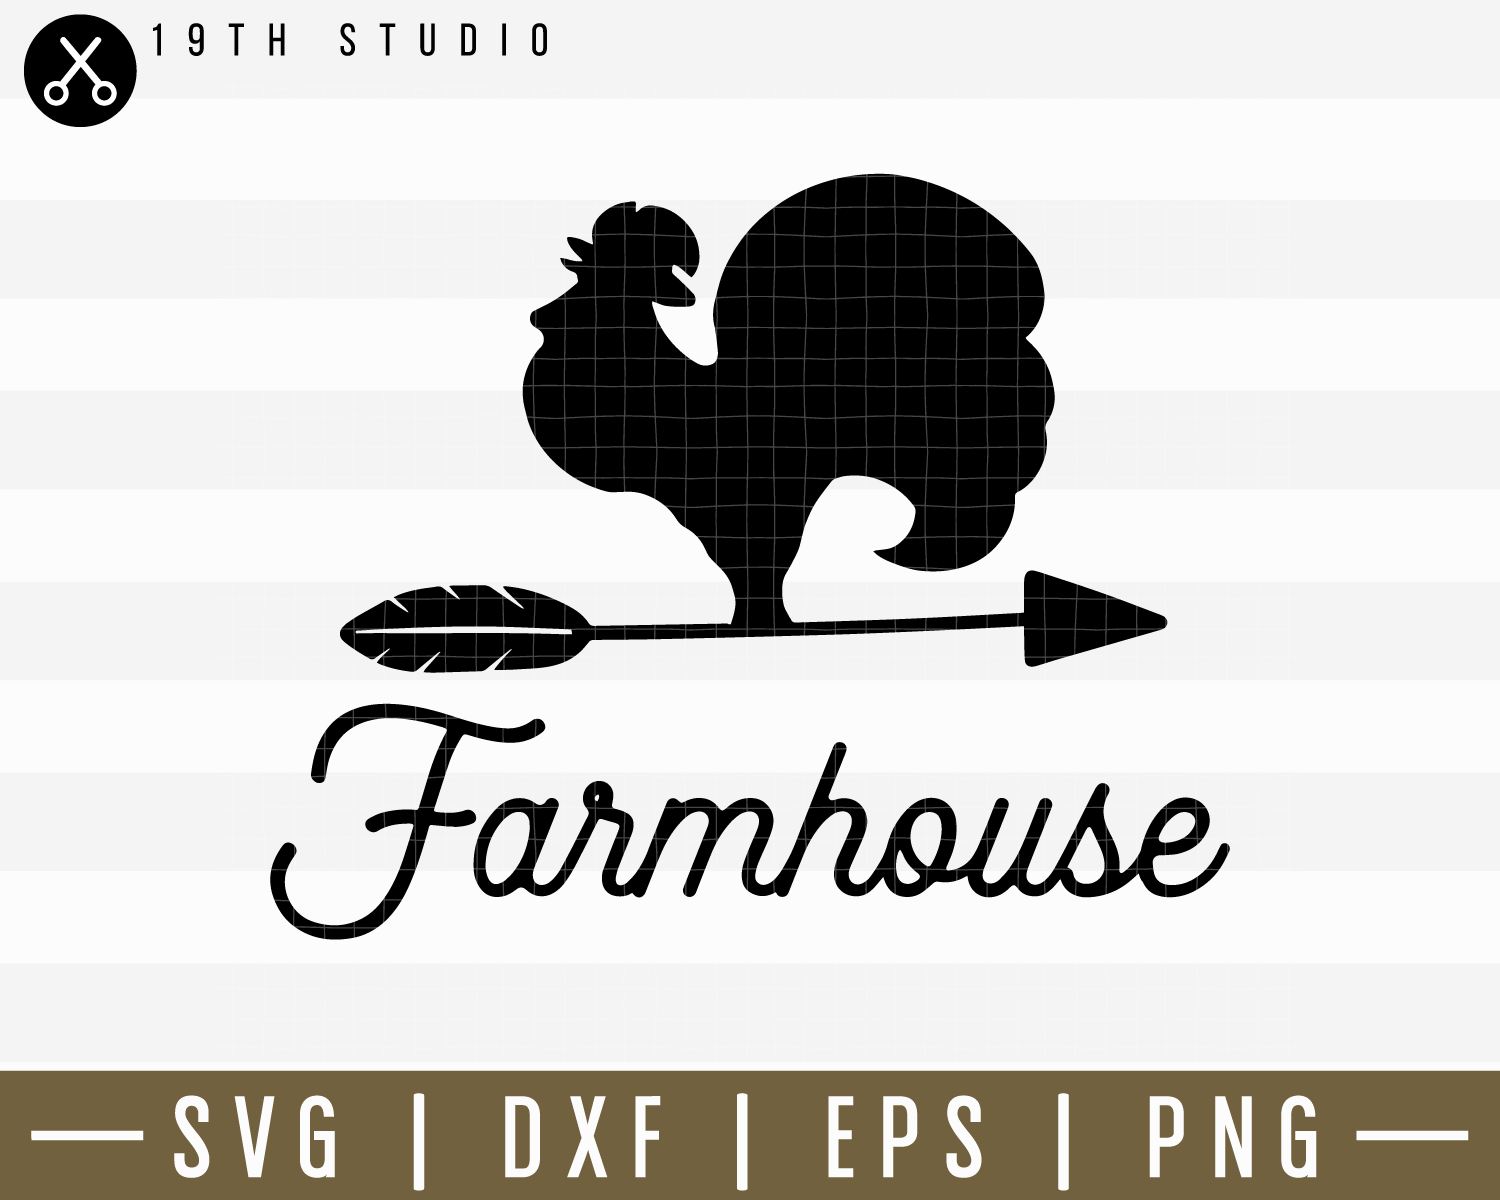 Farmhouse SVG | M14F6 Craft House SVG - SVG files for Cricut and Silhouette